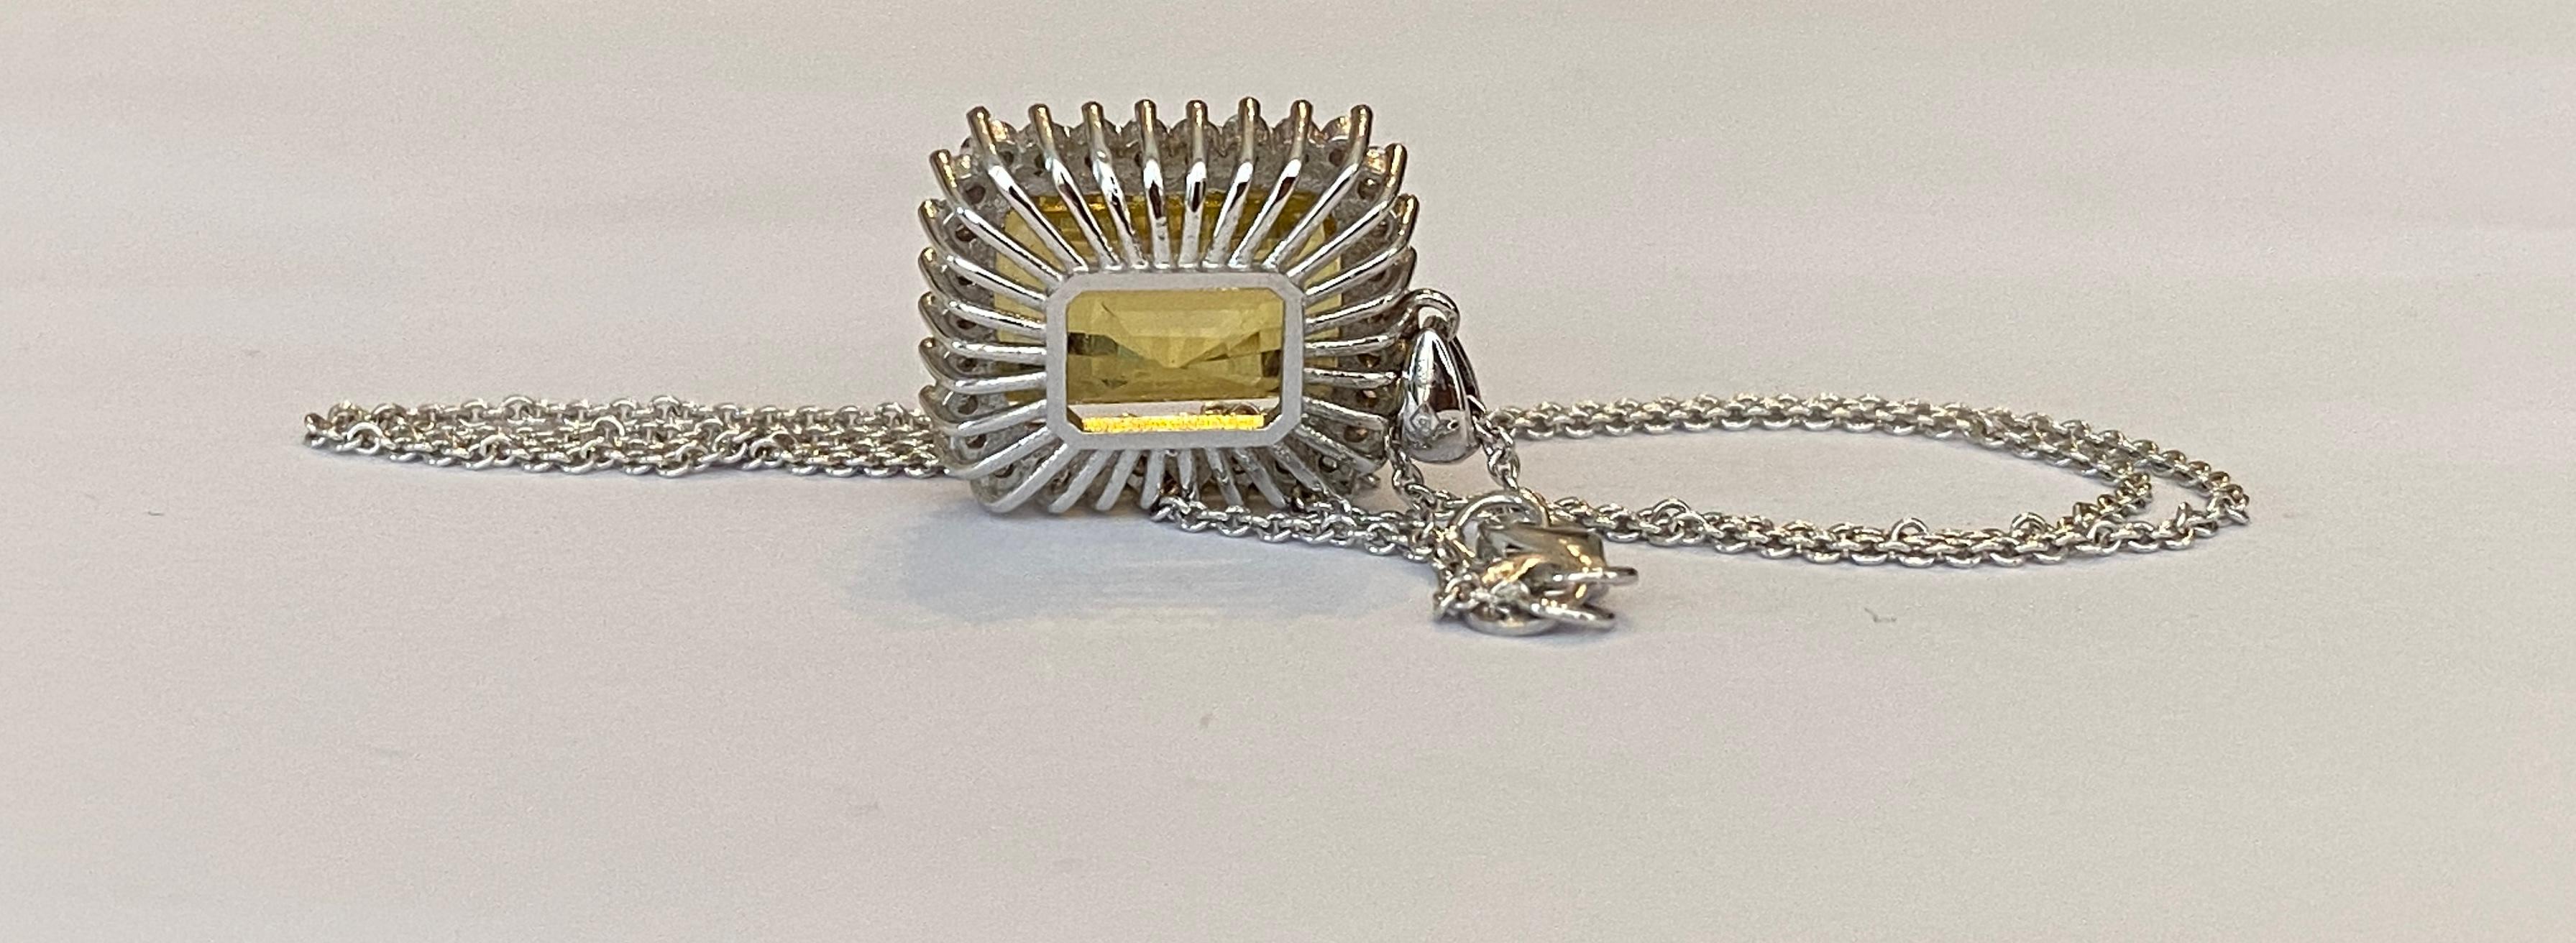 18 Karat White Gold Necklace with a Diamond Pendant Decorated with Citrine 3